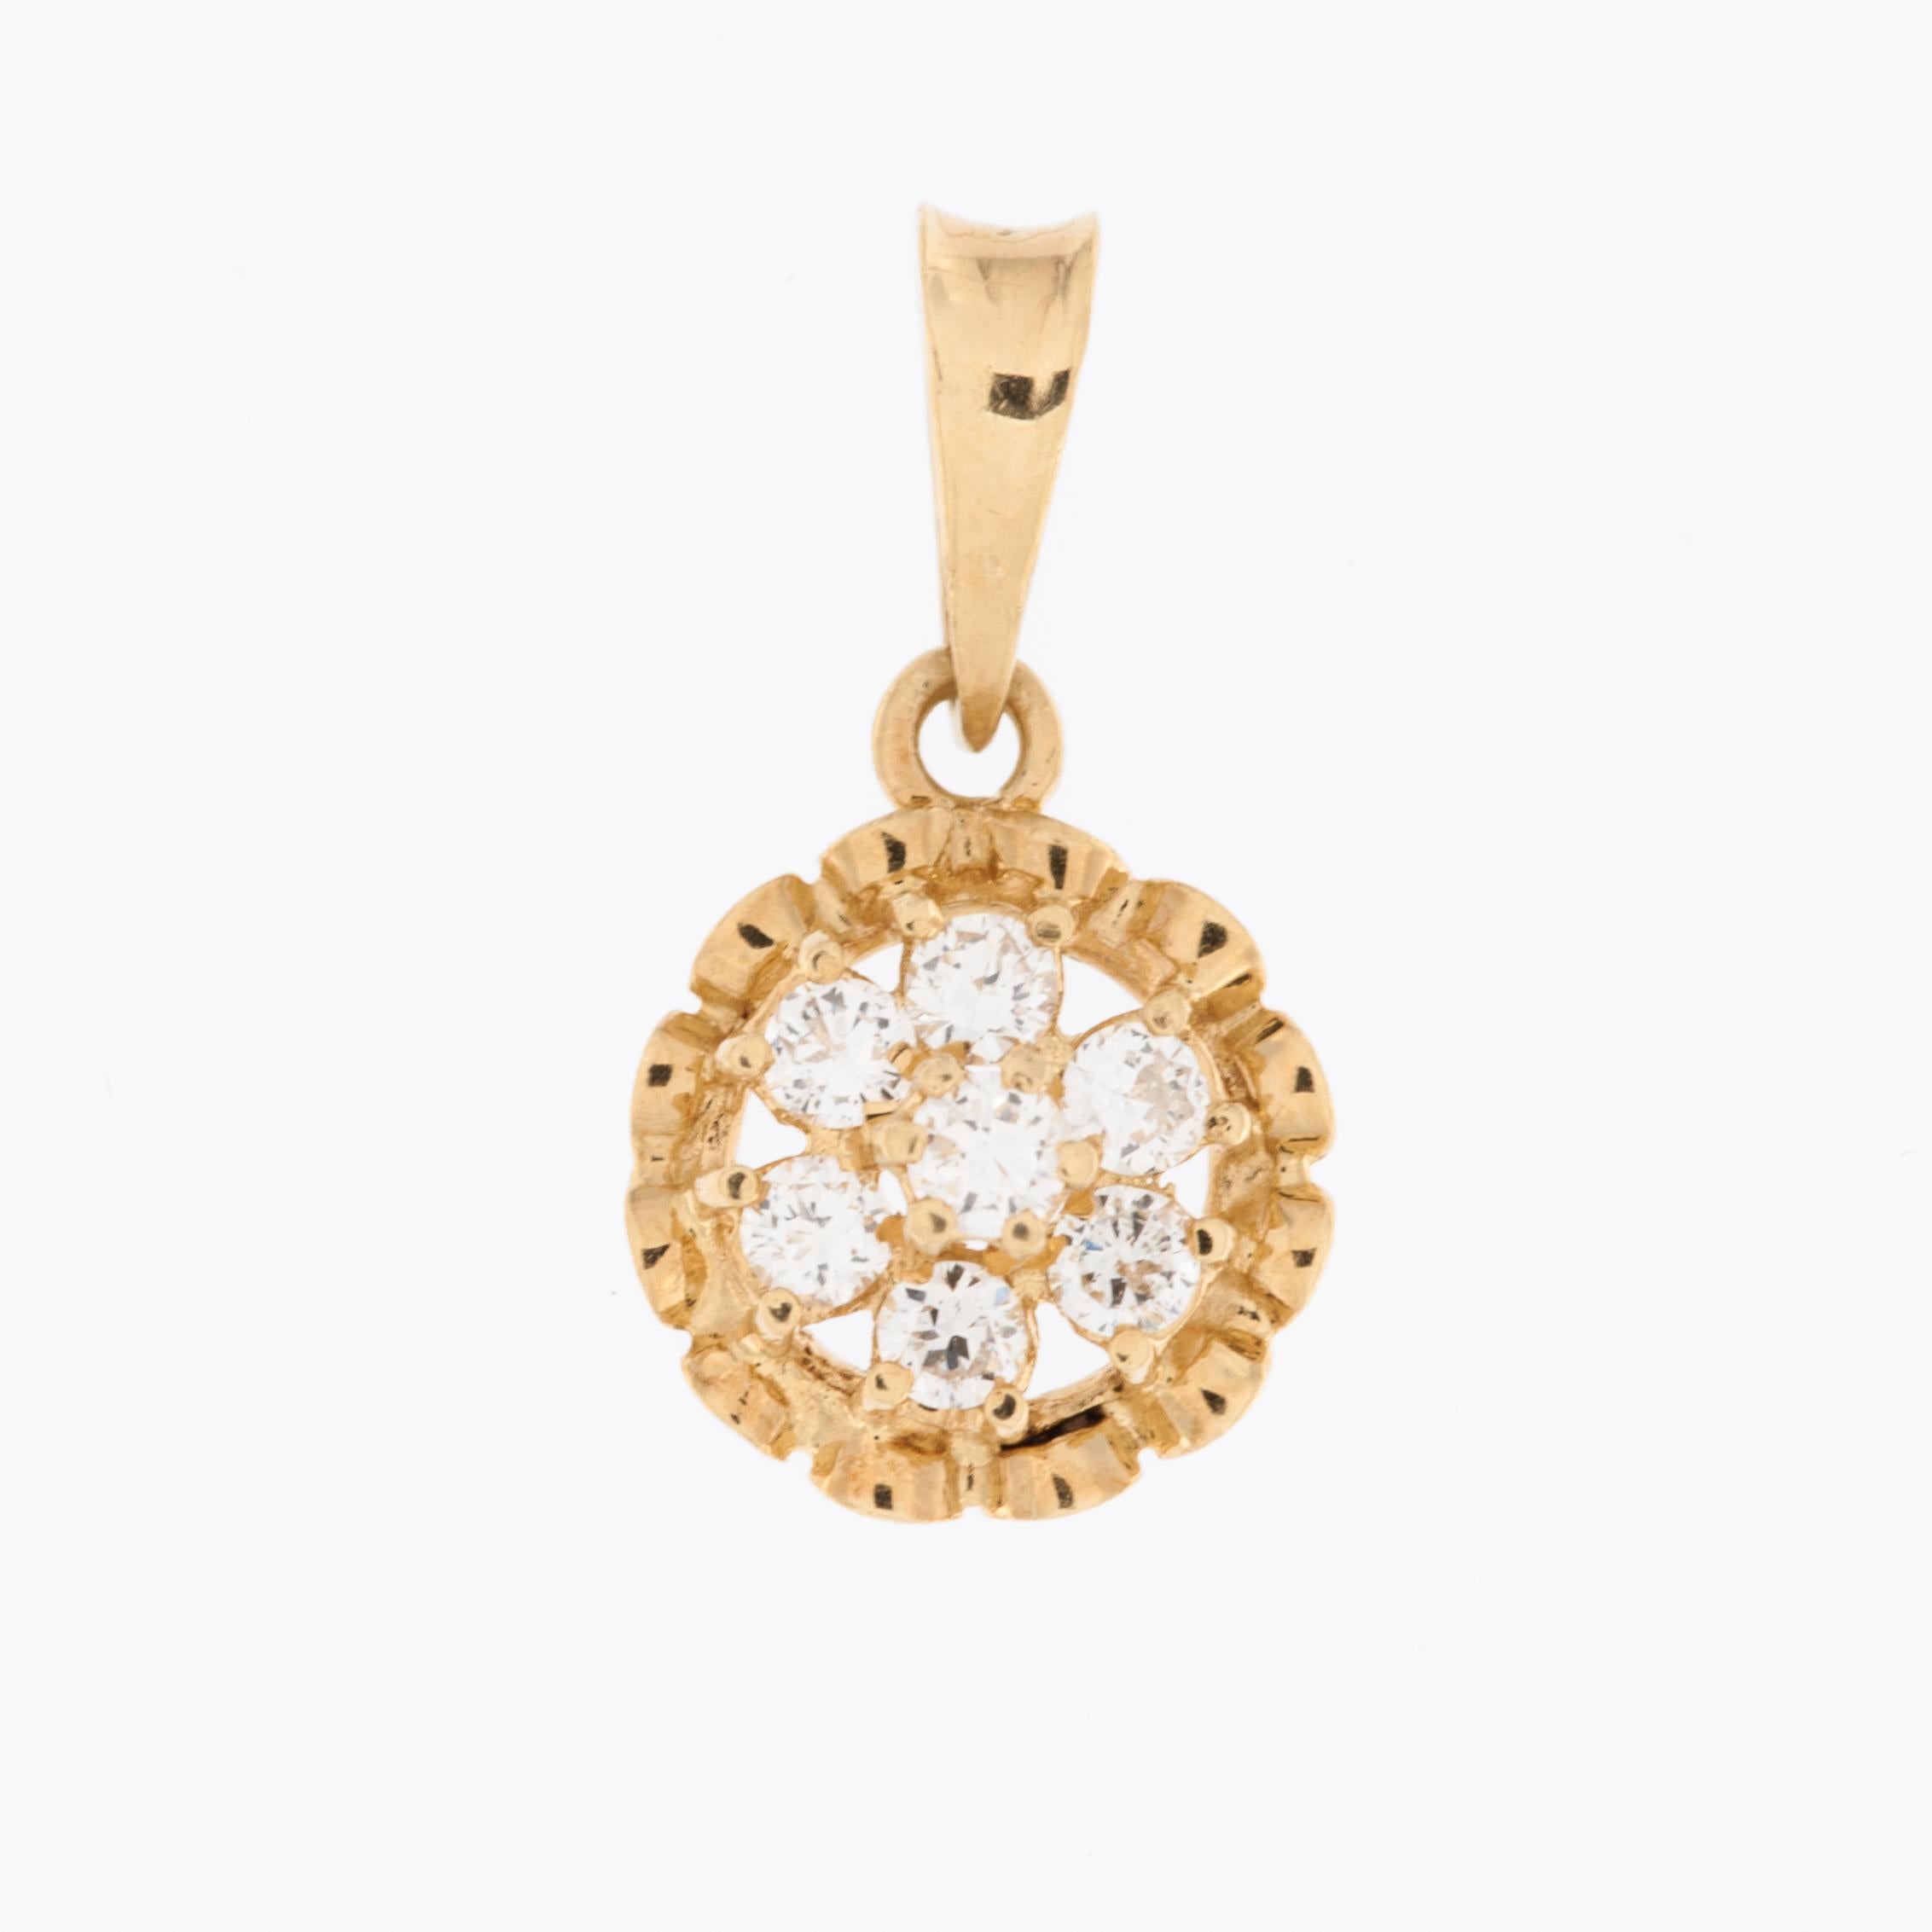 The Vintage 18kt Yellow Gold Flower Design Pendant with Diamonds is an exquisite and timeless piece of jewelry that seamlessly blends classic elegance with intricate craftsmanship. The pendant is crafted from high-quality 18-karat yellow gold, known